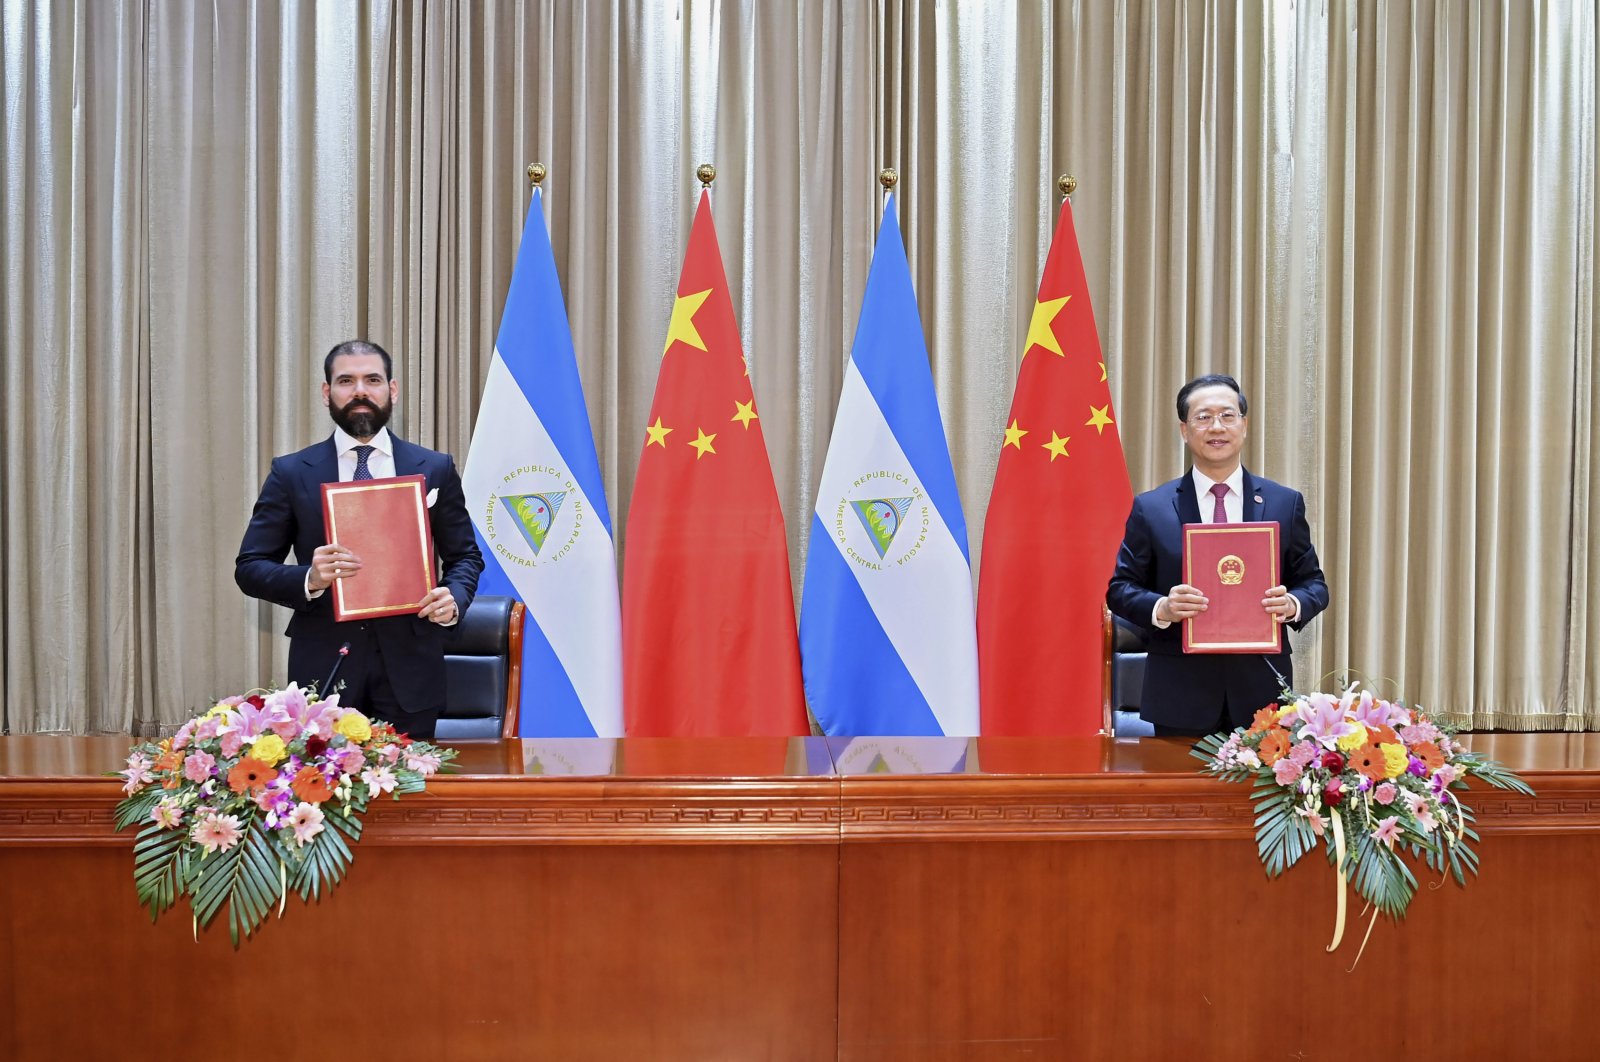 In this photo released by China’s Xinhua News Agency, representatives Laureano Ortega Murillo (L), son of and advisor to Nicaraguan President Daniel Ortega, and Chinese Vice Foreign Minister Ma Zhaoxu display their jointly signed communique on the resumption of diplomatic relations between the two countries in northern China’s Tianjin Municipality, Dec. 10, 2021. (AP Photo)